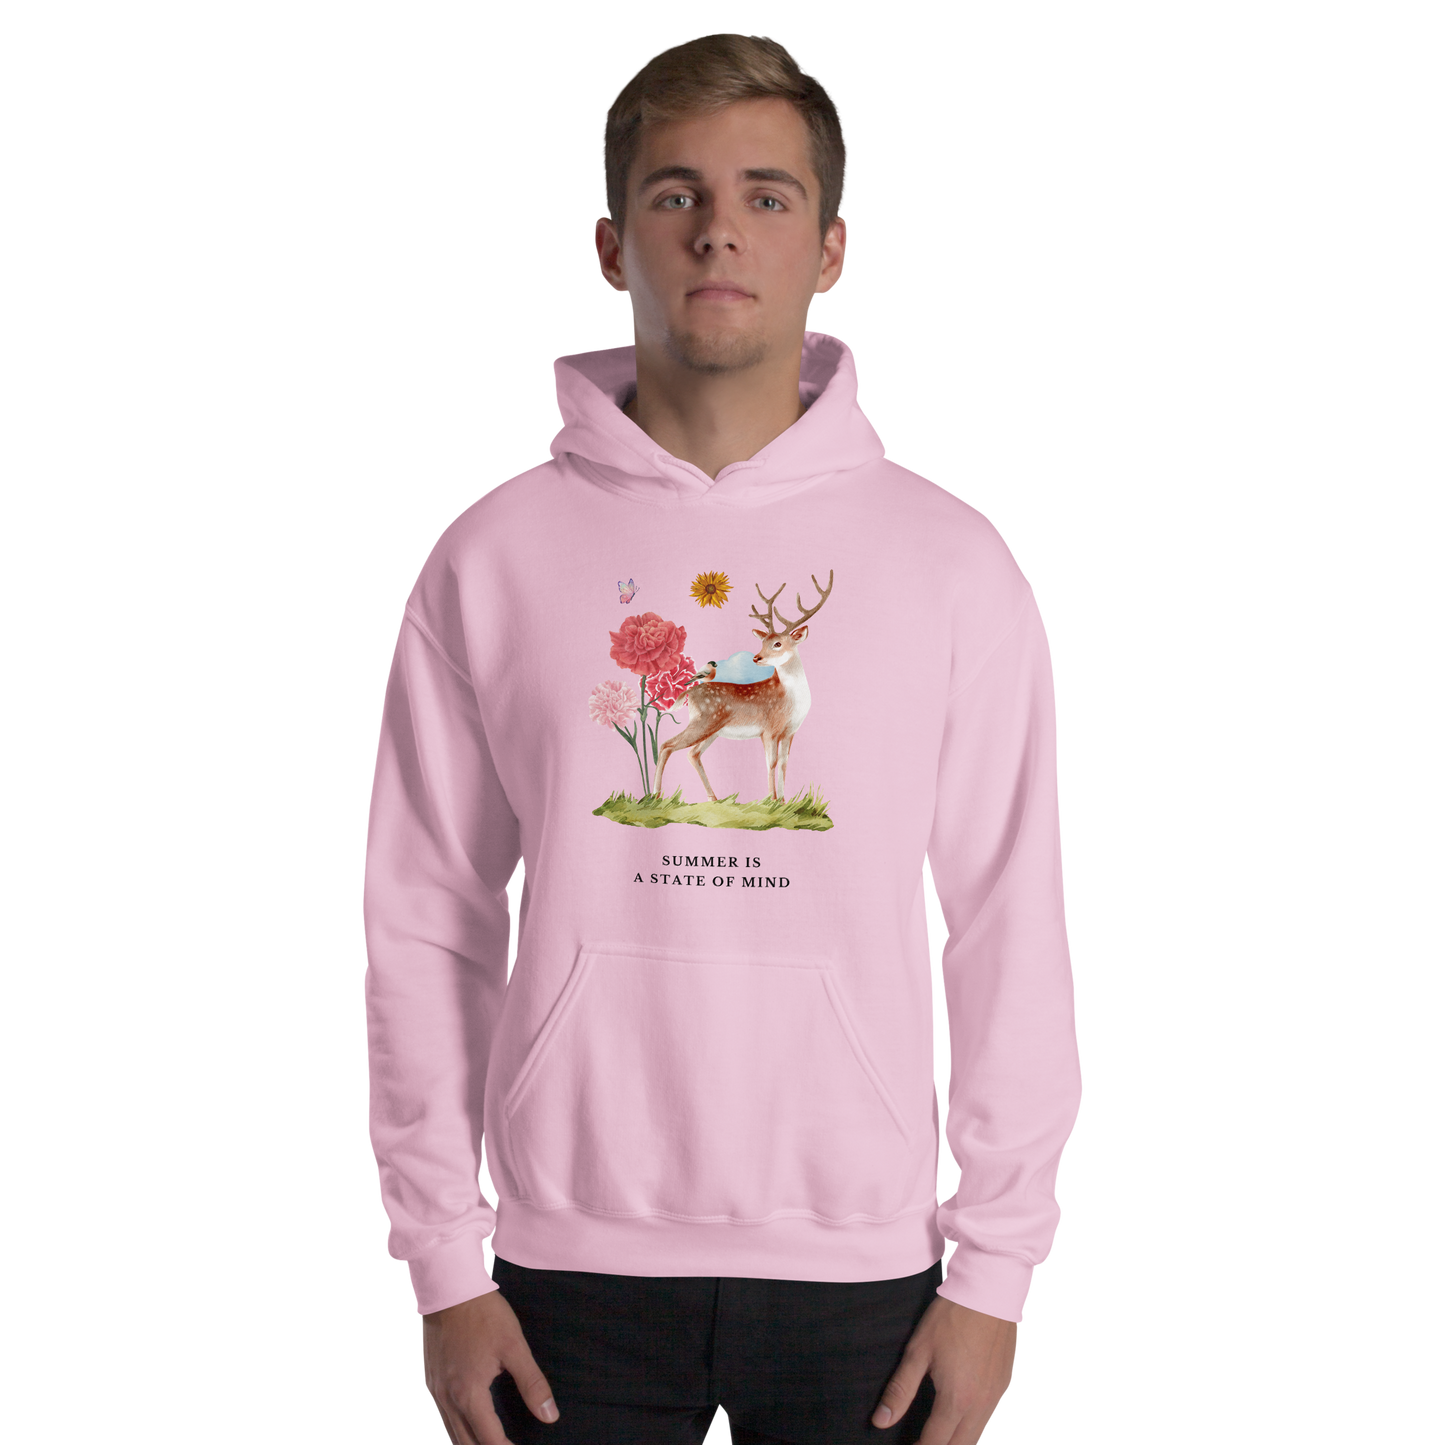 Man wearing a Light Pink Summer Is a State of Mind Hoodie Featuring a Summer Is a State of Mind graphic on the chest - Cute Graphic Summer Hoodies - Boozy Fox